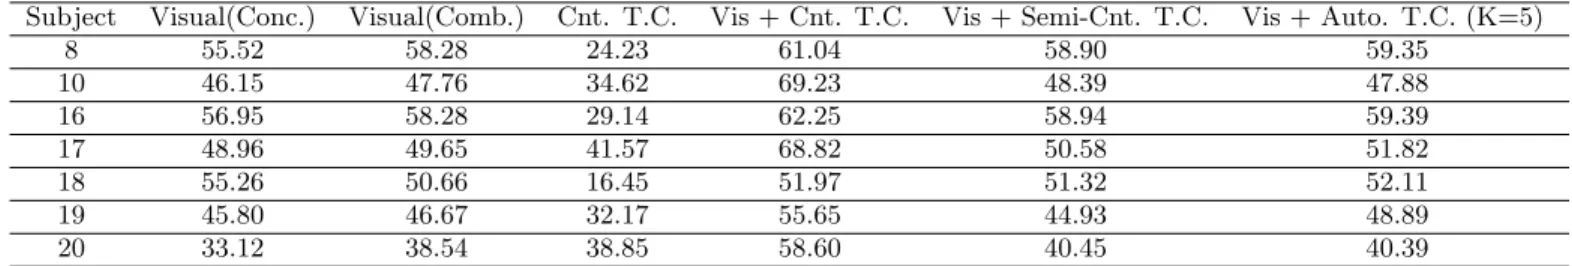 Table 5: Comparison of All Experiments